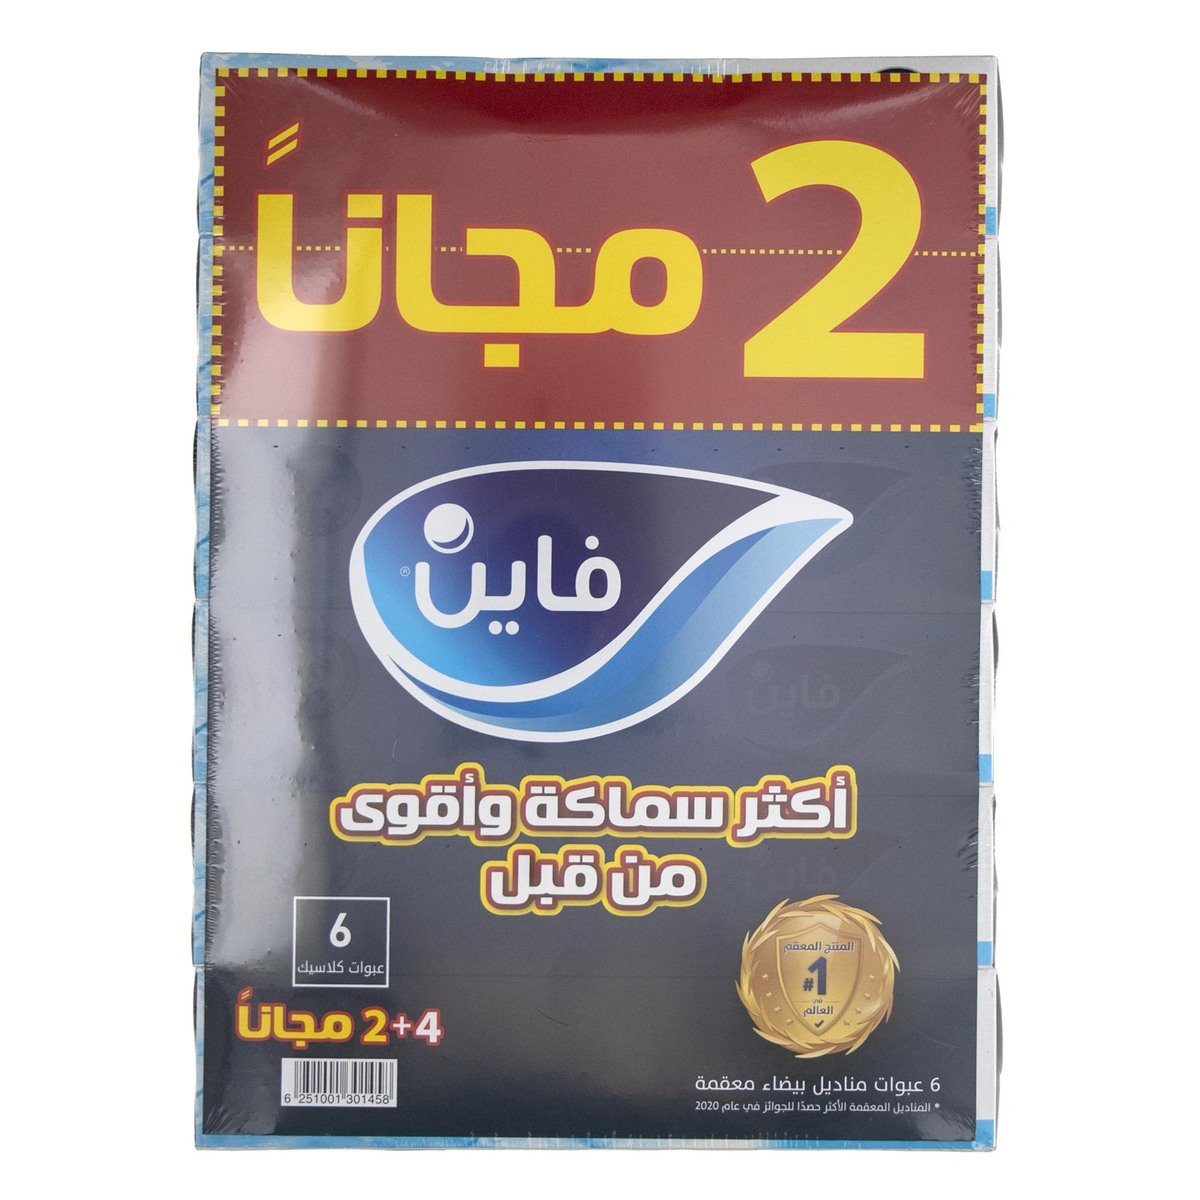 Buy Fine Facial Tissue Classic 2ply 86 Sheets 4+2 Free Online at Best Price | Facial Tissues | Lulu KSA in Saudi Arabia